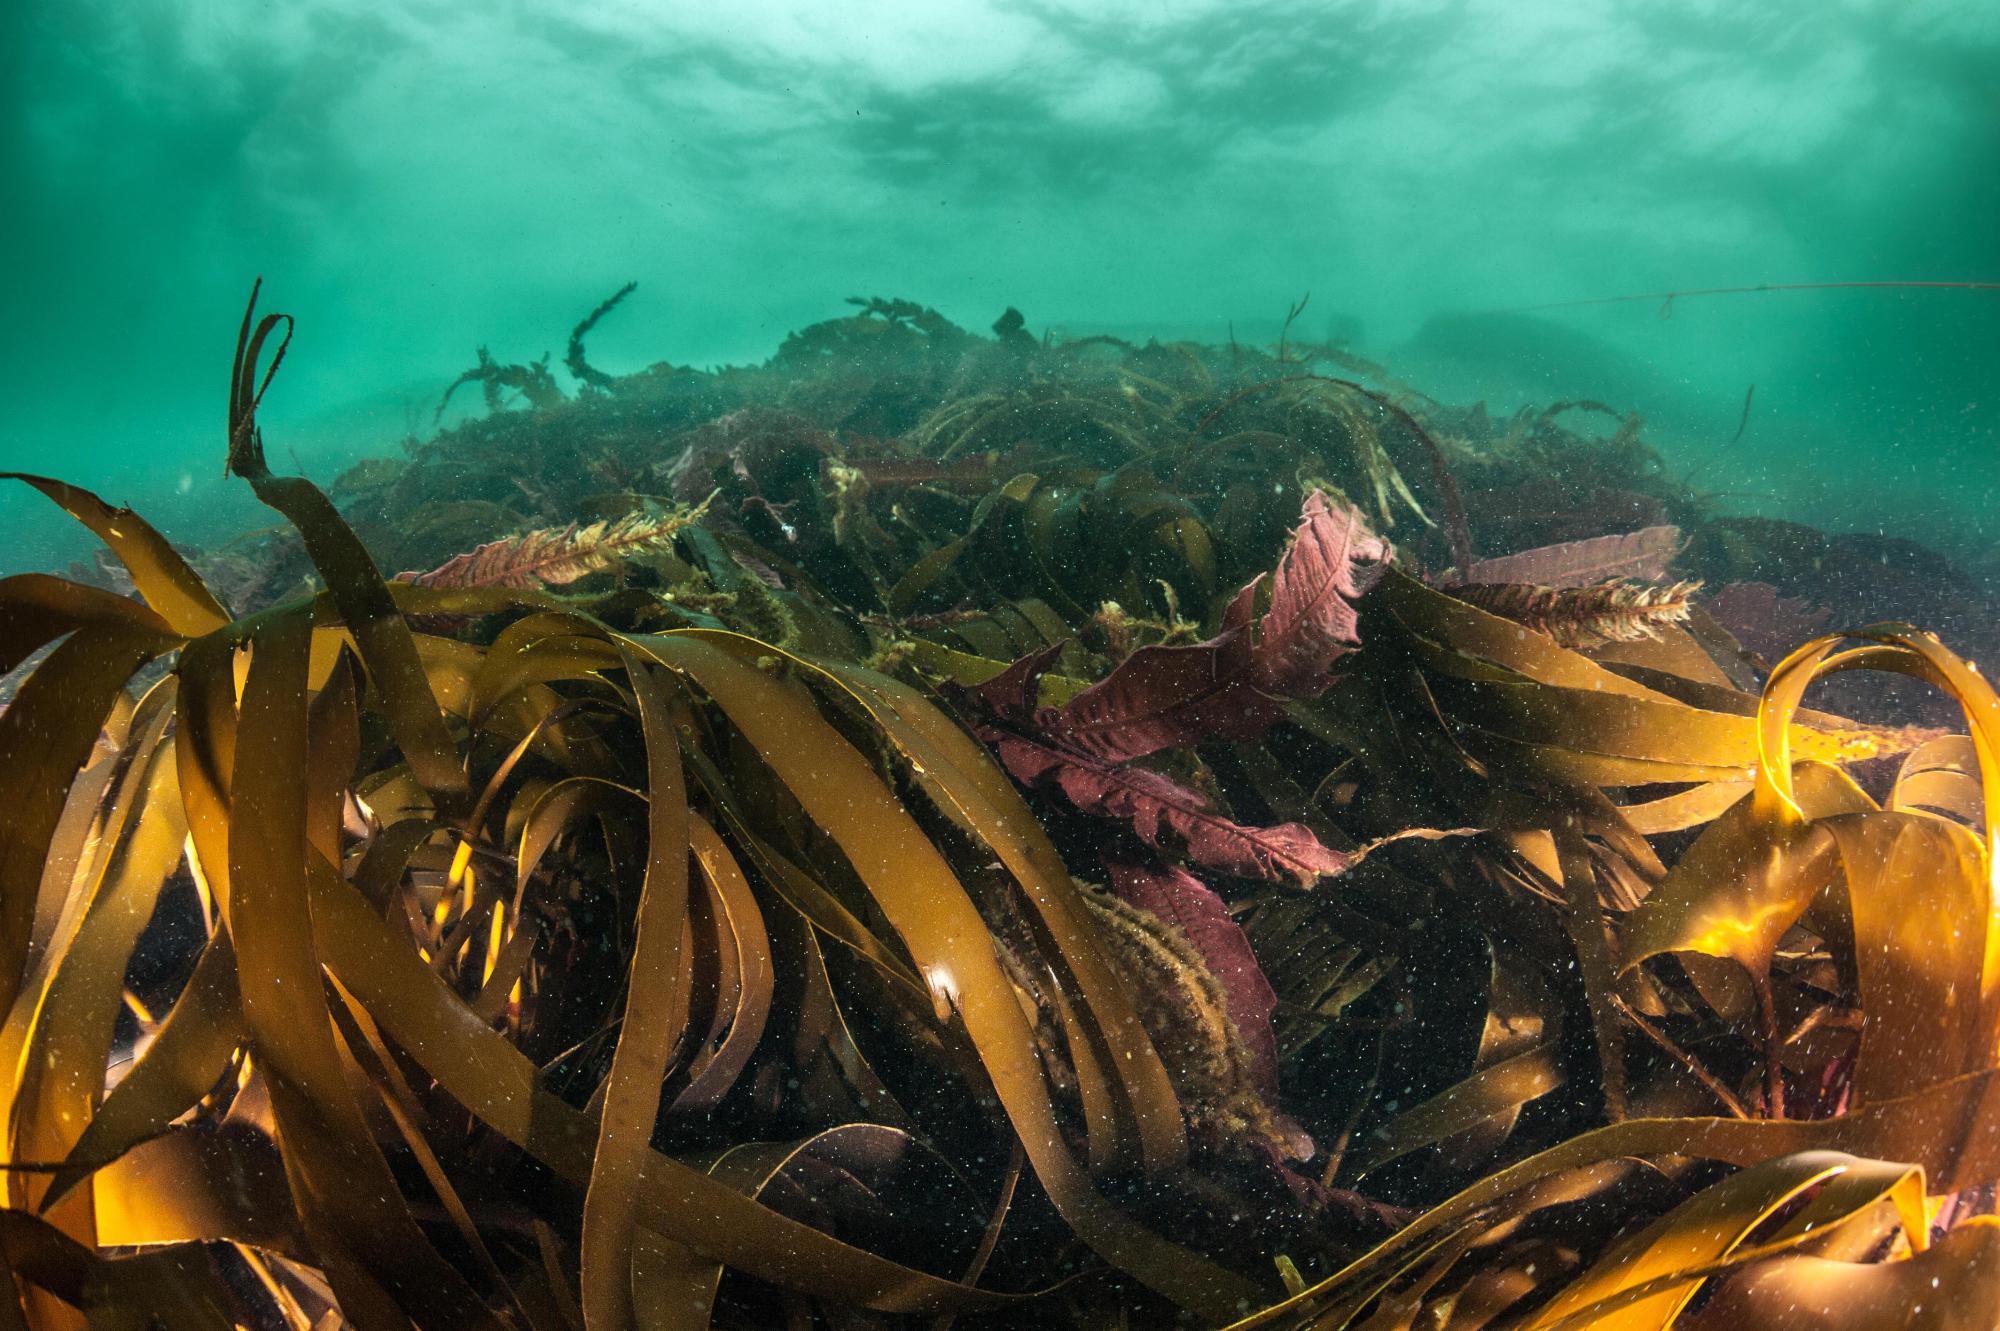 Kelp forest. ©George Stoyle/SNH. For information on reproduction rights contact the Scottish Natural Heritage Image Library on Tel. 01738 444177 or www.nature.scot